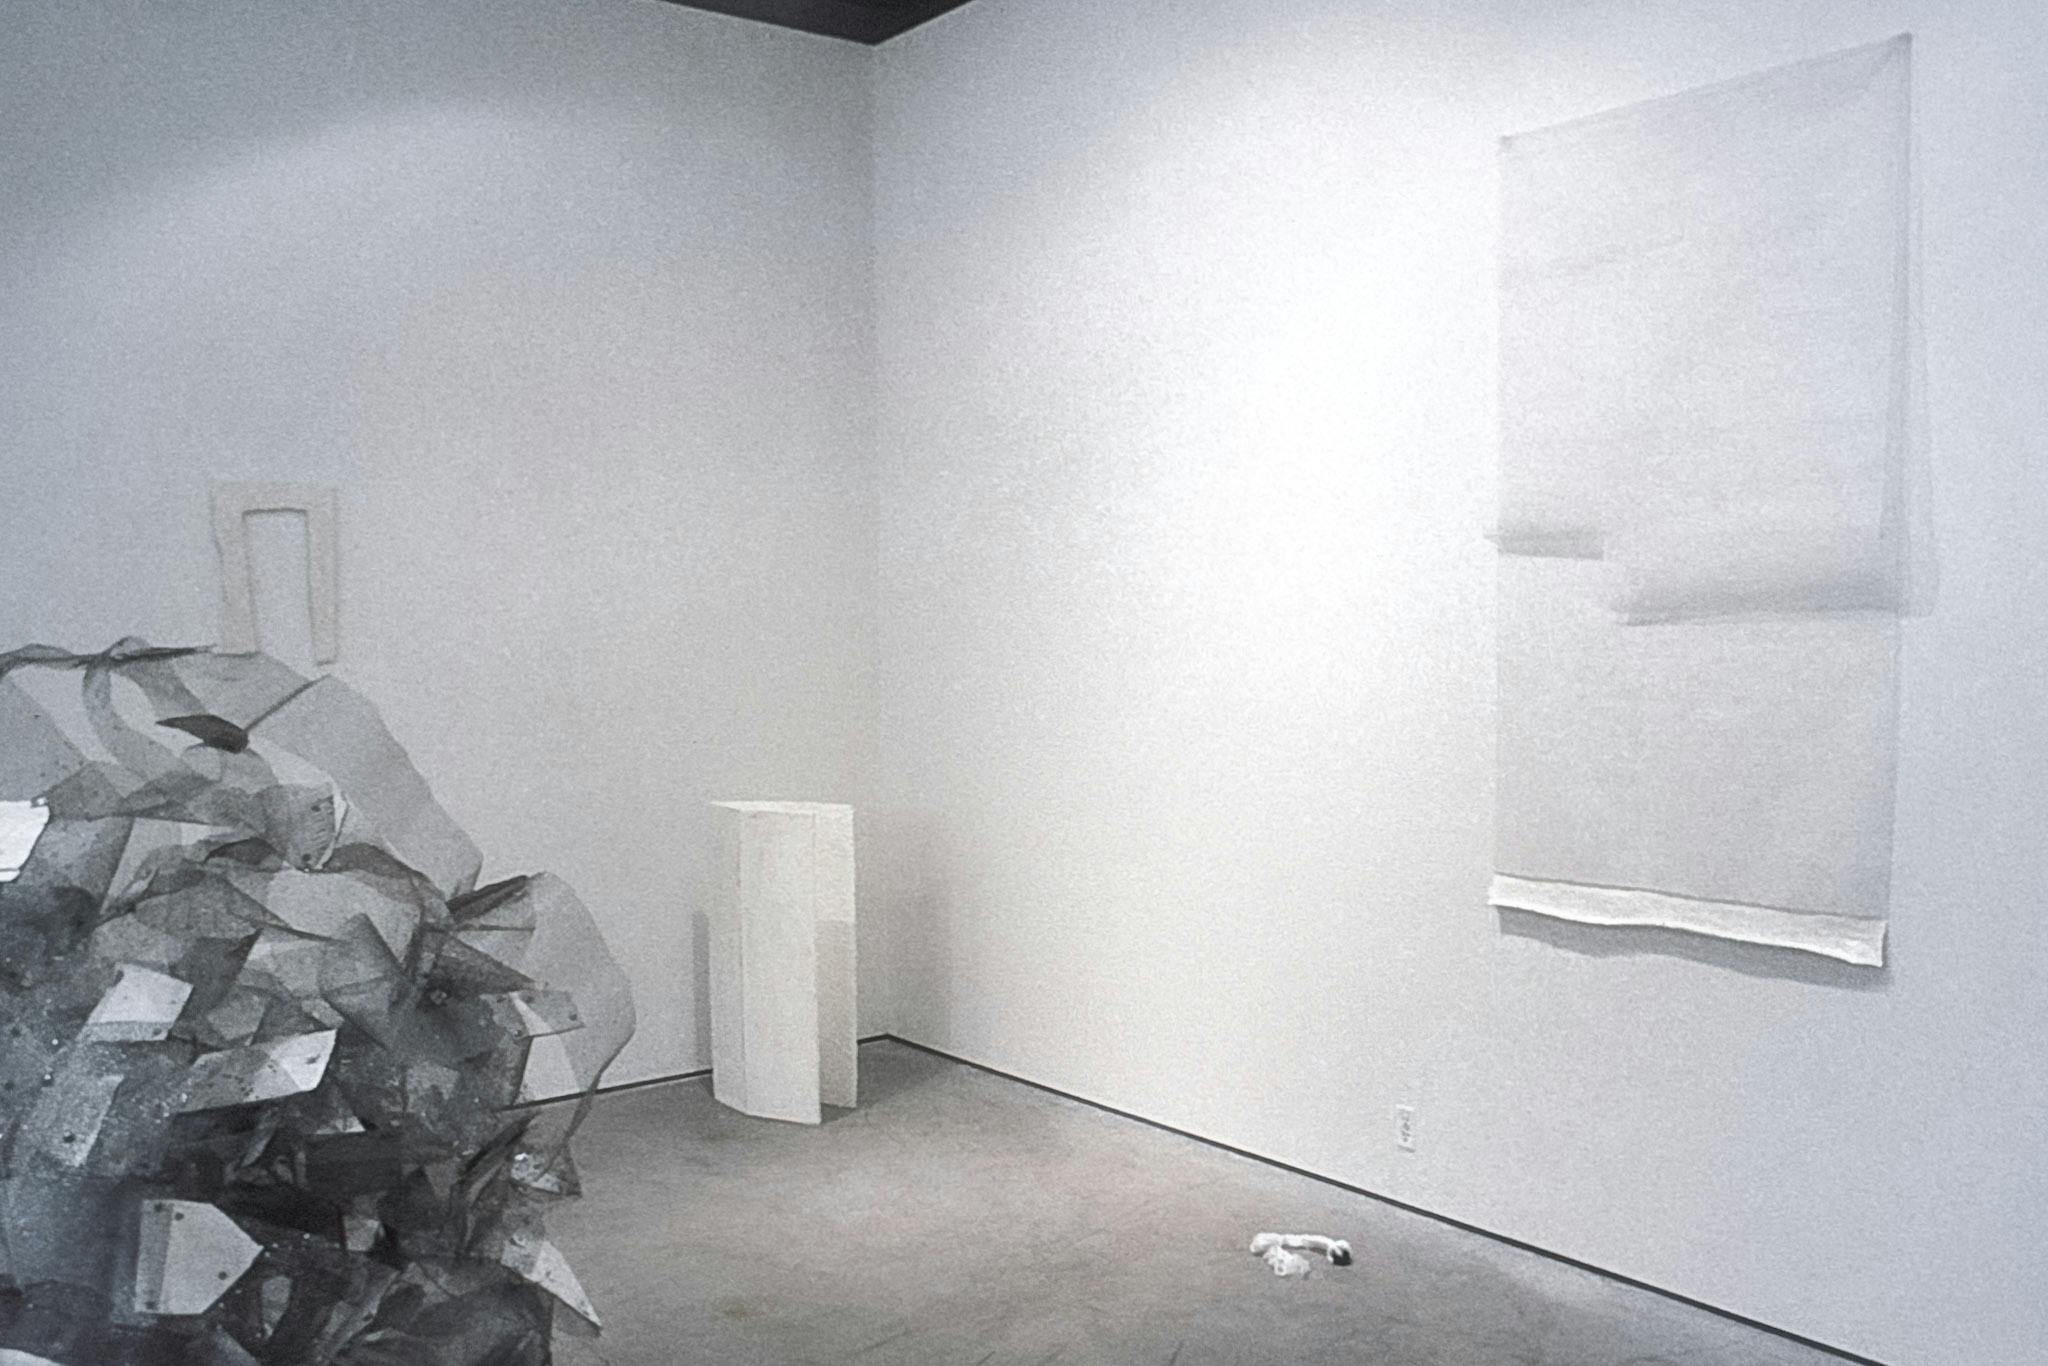 A closeup of artworks in a gallery. The works include sheer white sheets on the wall, a small textile object on the floor, and a tall and white box, with open flaps.